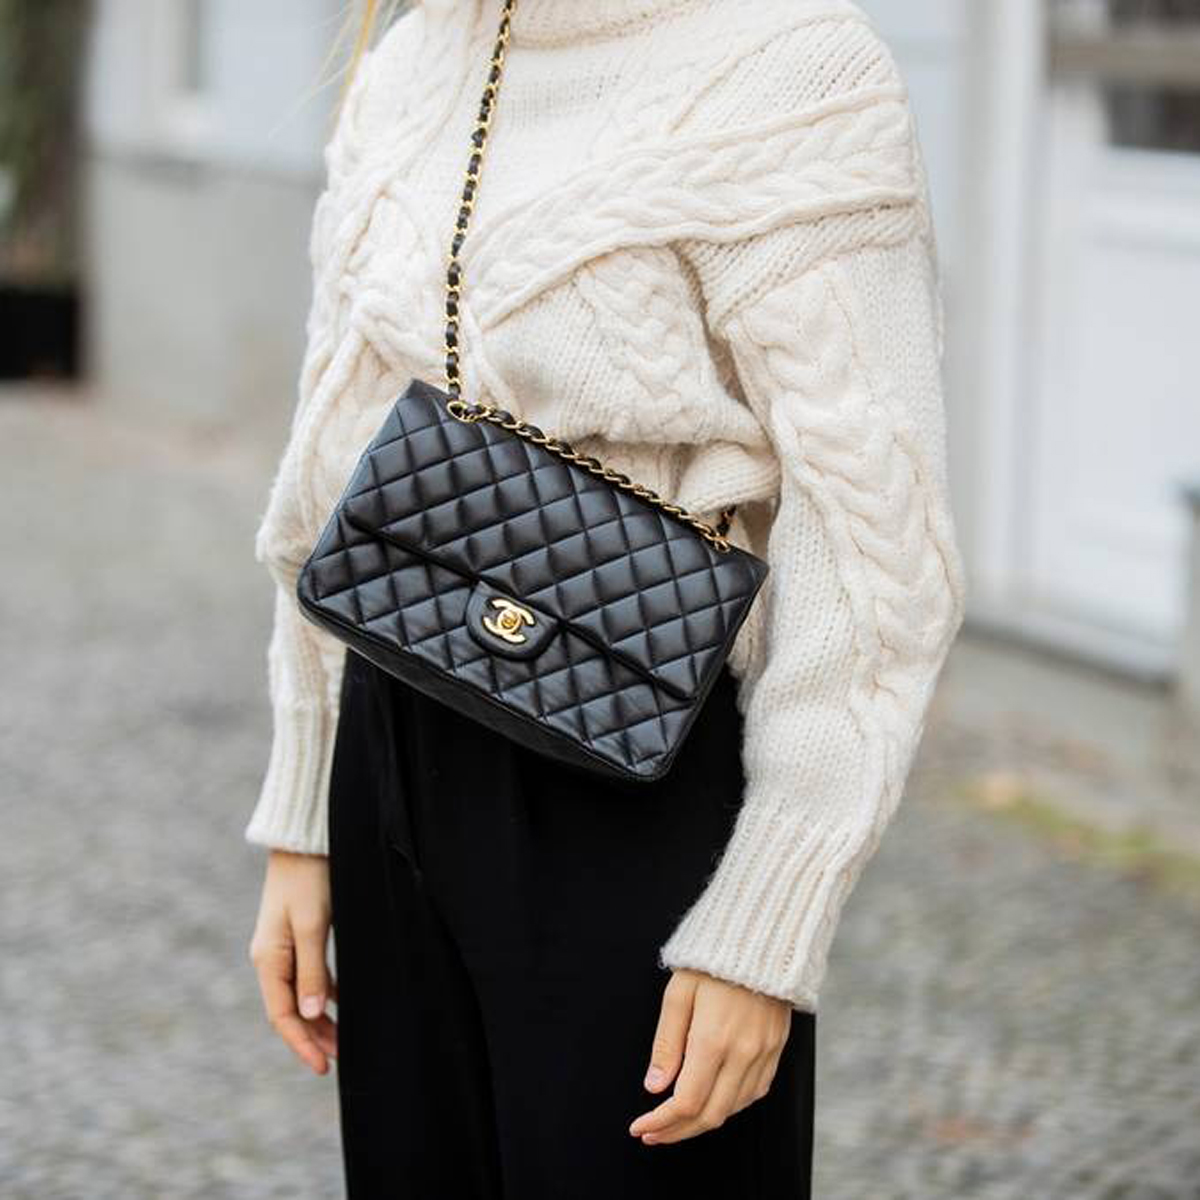 The Best Chanel-Inspired Bags (And Where to Find Them)